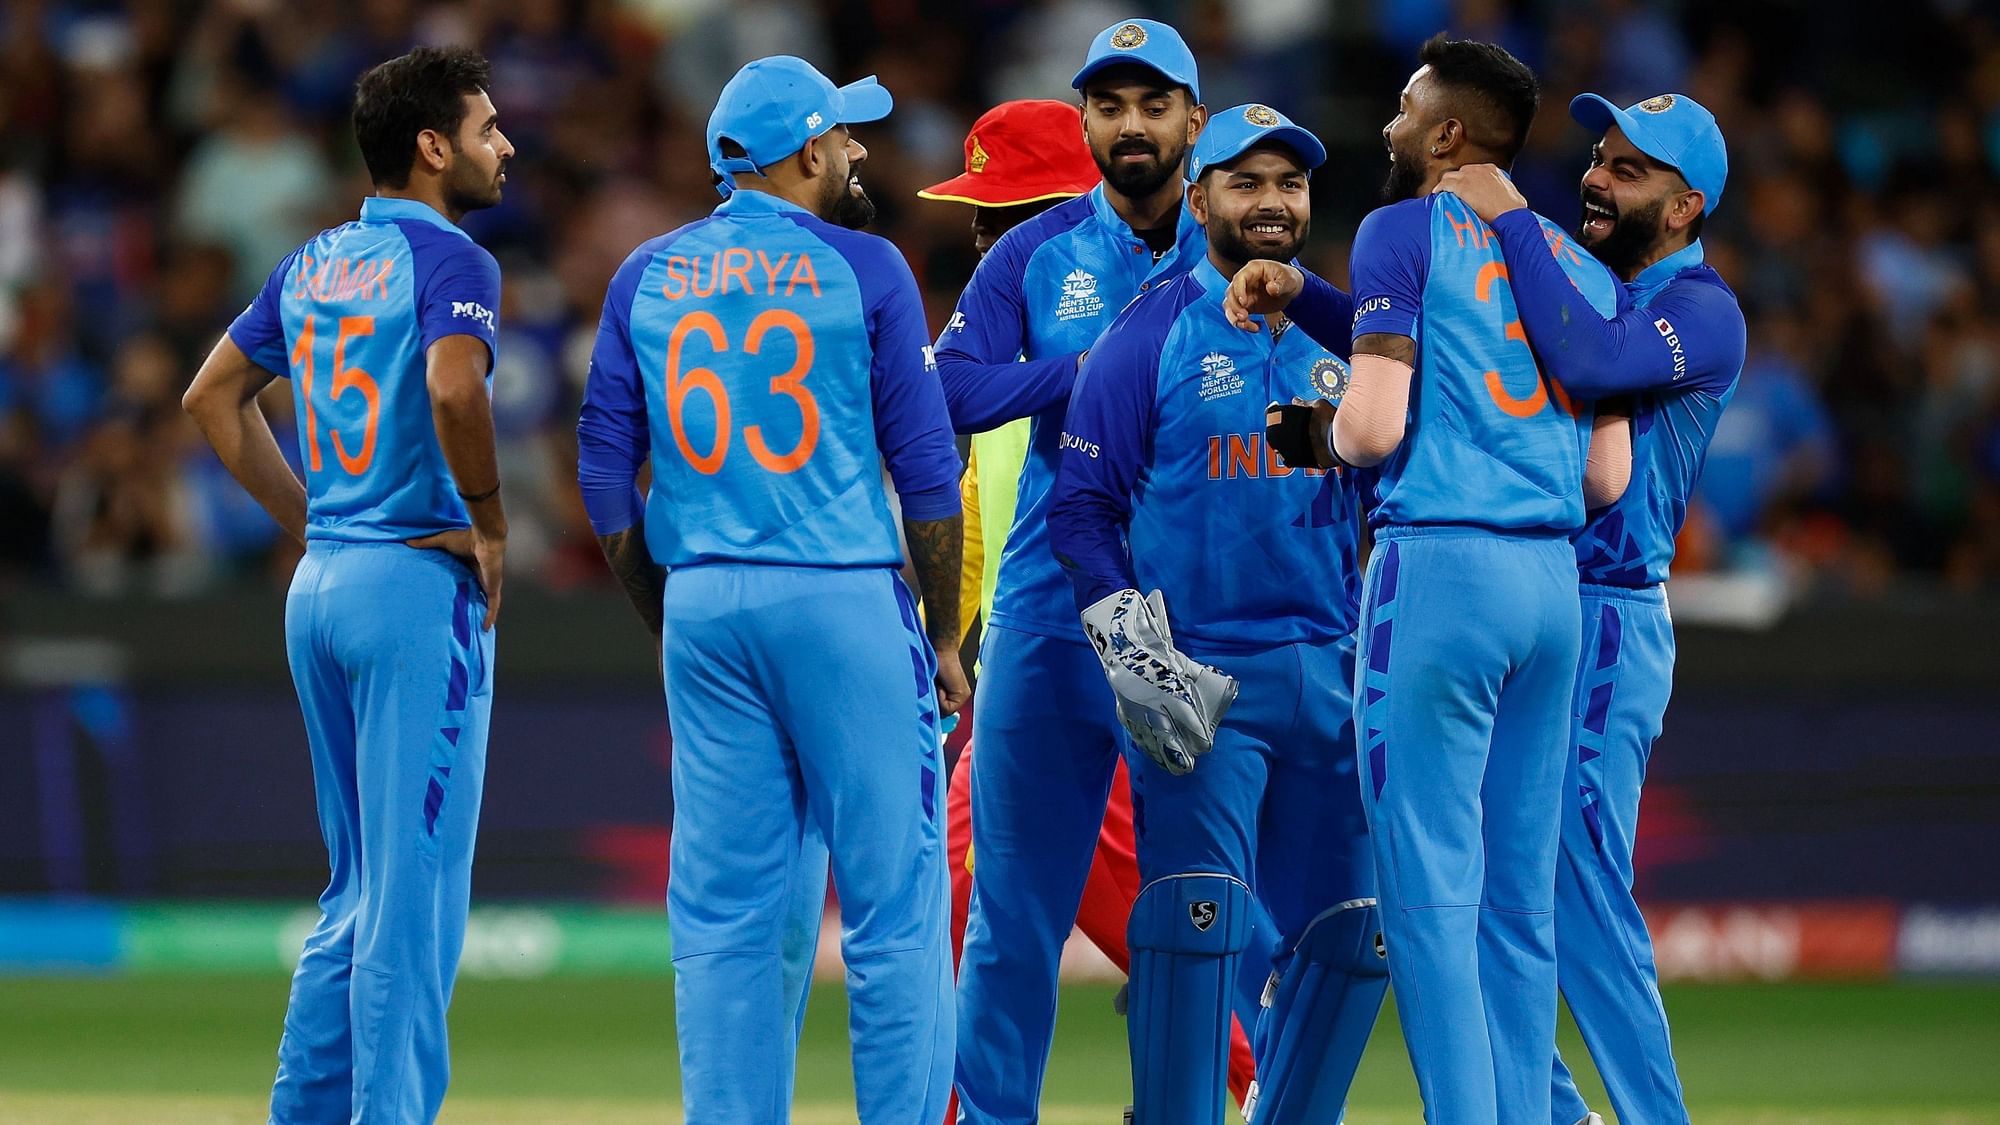 India vs England Live Streaming IND Vs ENG Semi Final T20 World Cup 2022 When and Where To Watch Live Telecast of IND vs ENG Match Today, Live Cricket Match